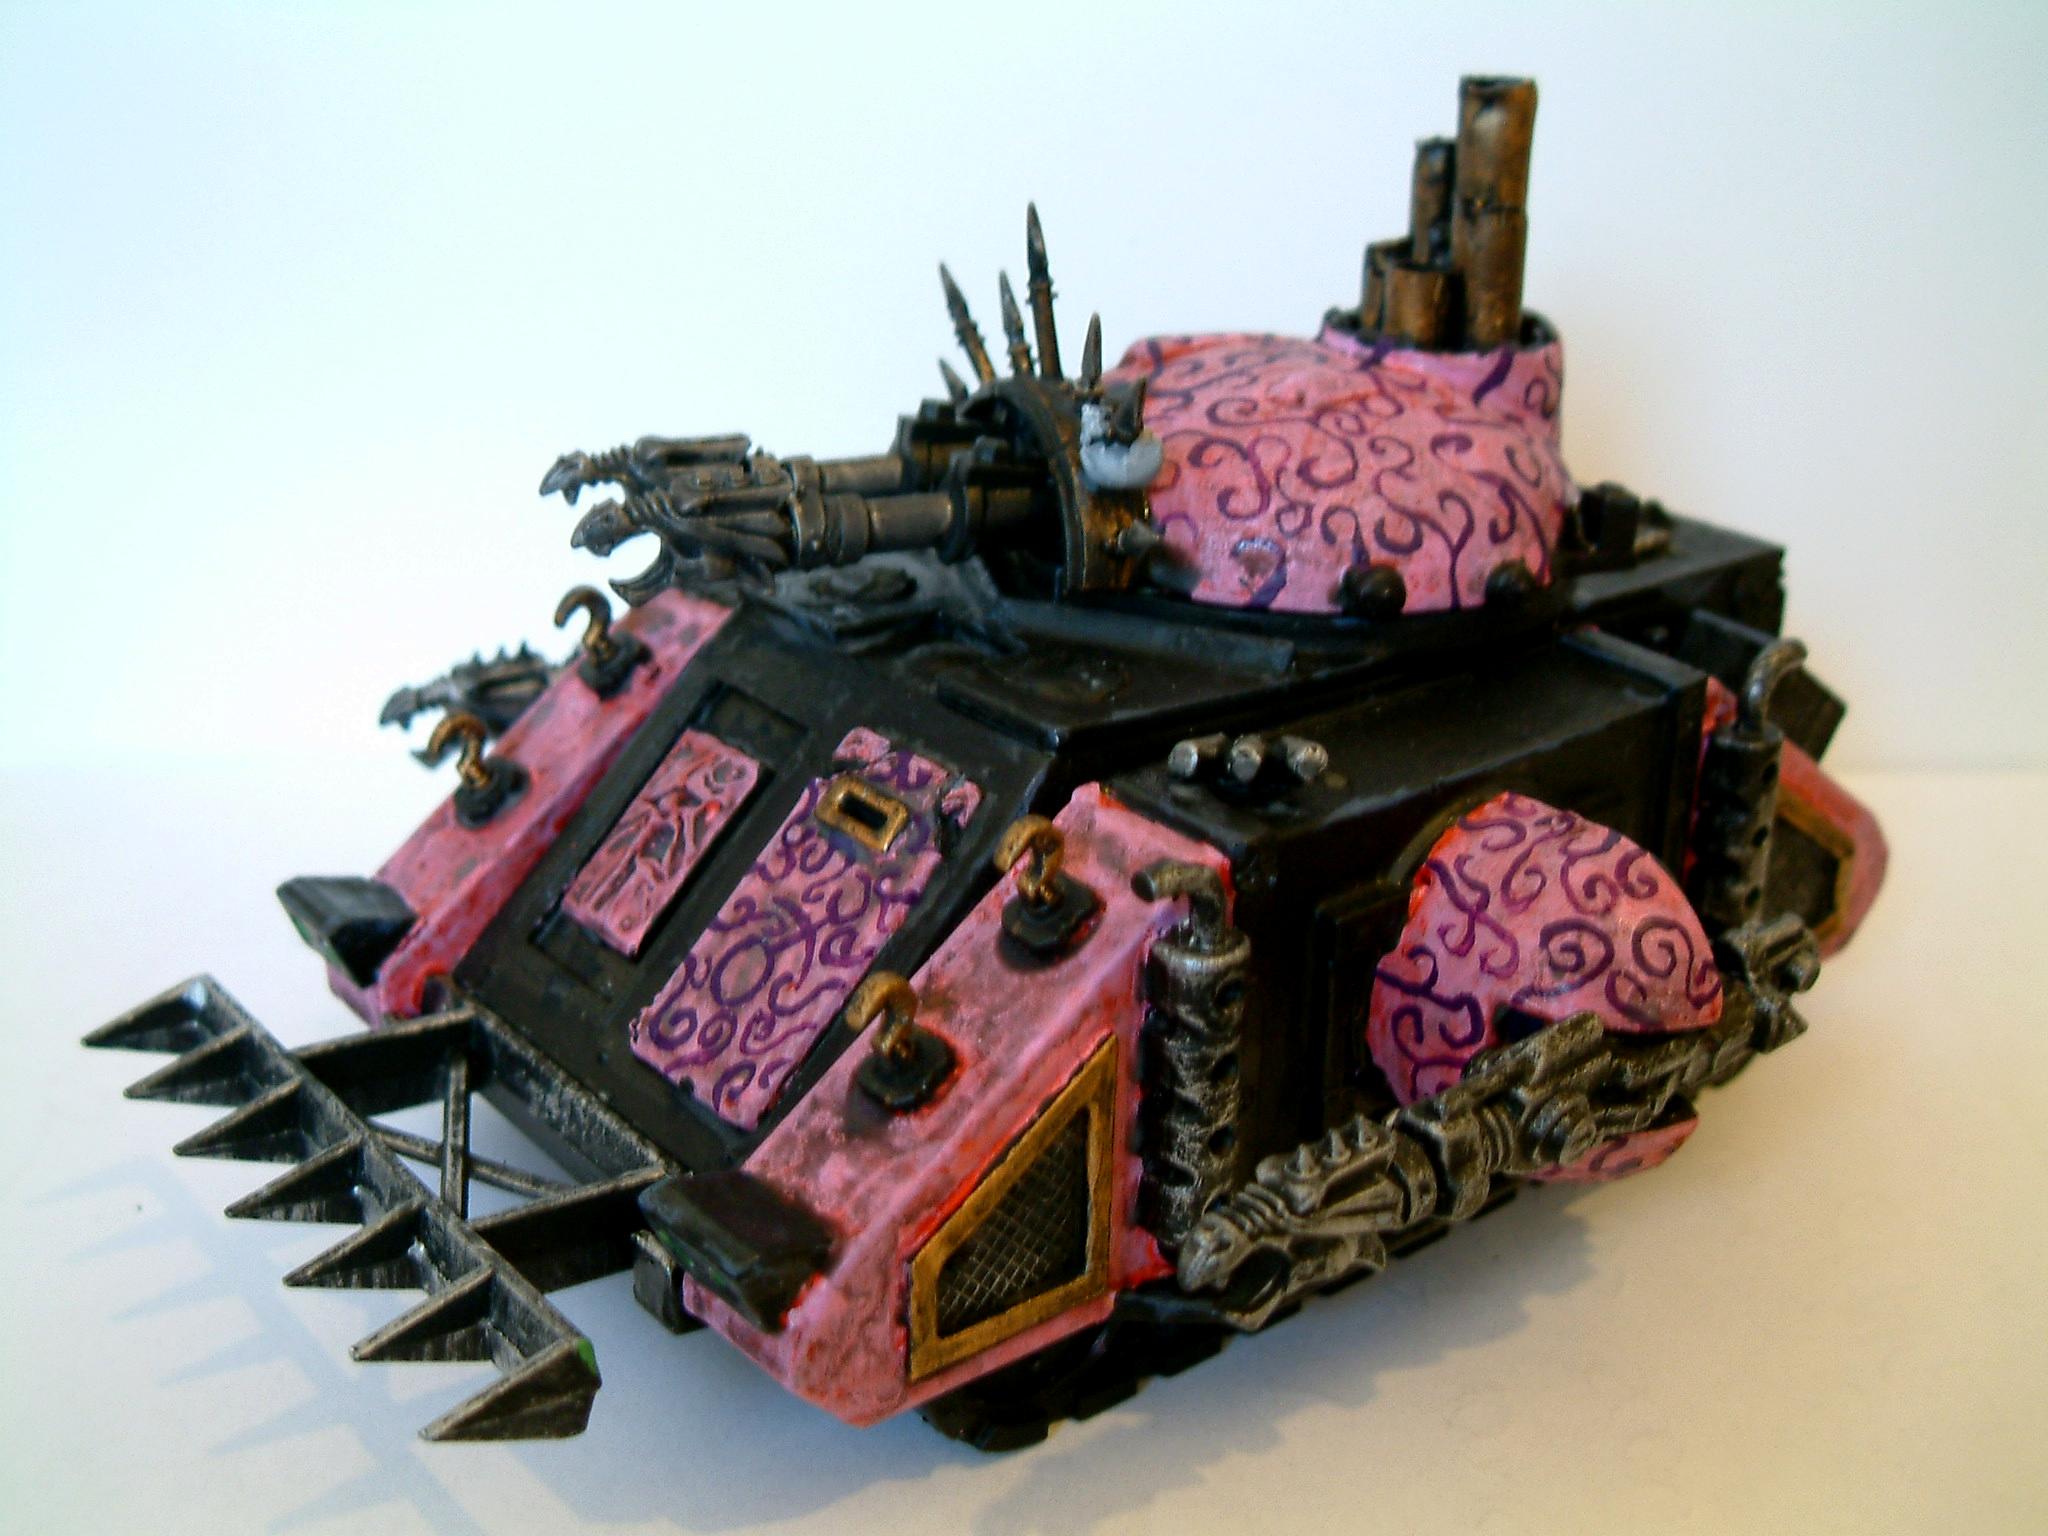 Astartes, Chaos, Classic, Conversion, Noise, Out Of Production, Pink, Slaanesh, Space, Space Marines, Warhammer 40,000